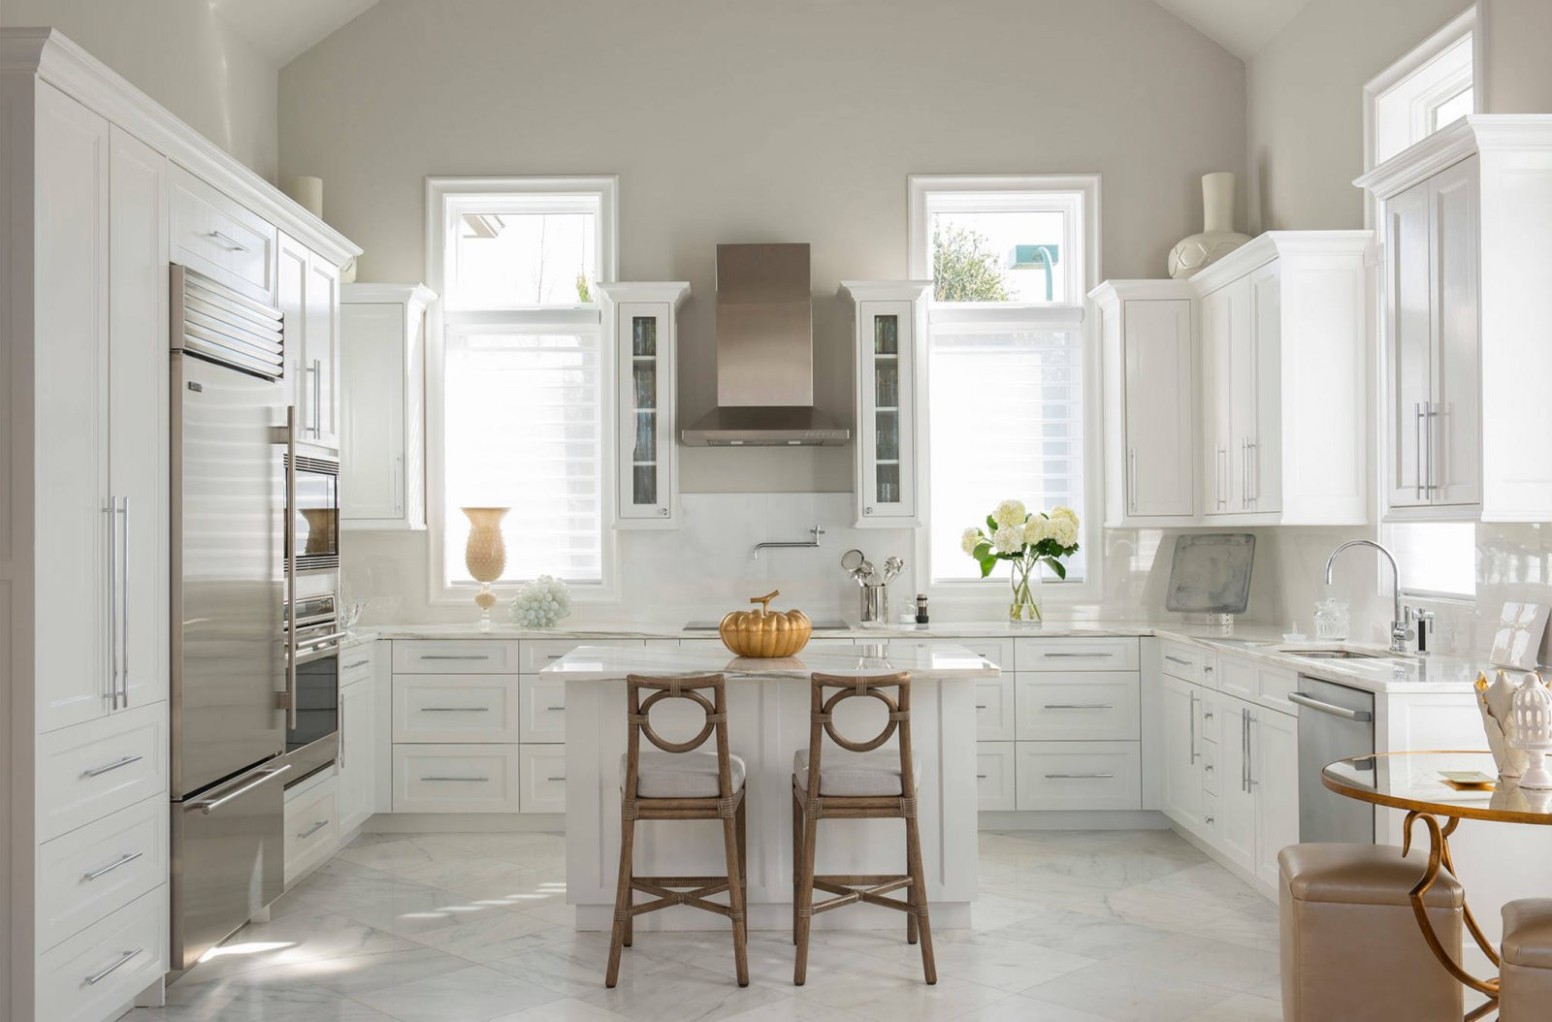 What Color Should I Paint My Kitchen with White Cabinets? 4 Best  - gray kitchen walls with white cabinets